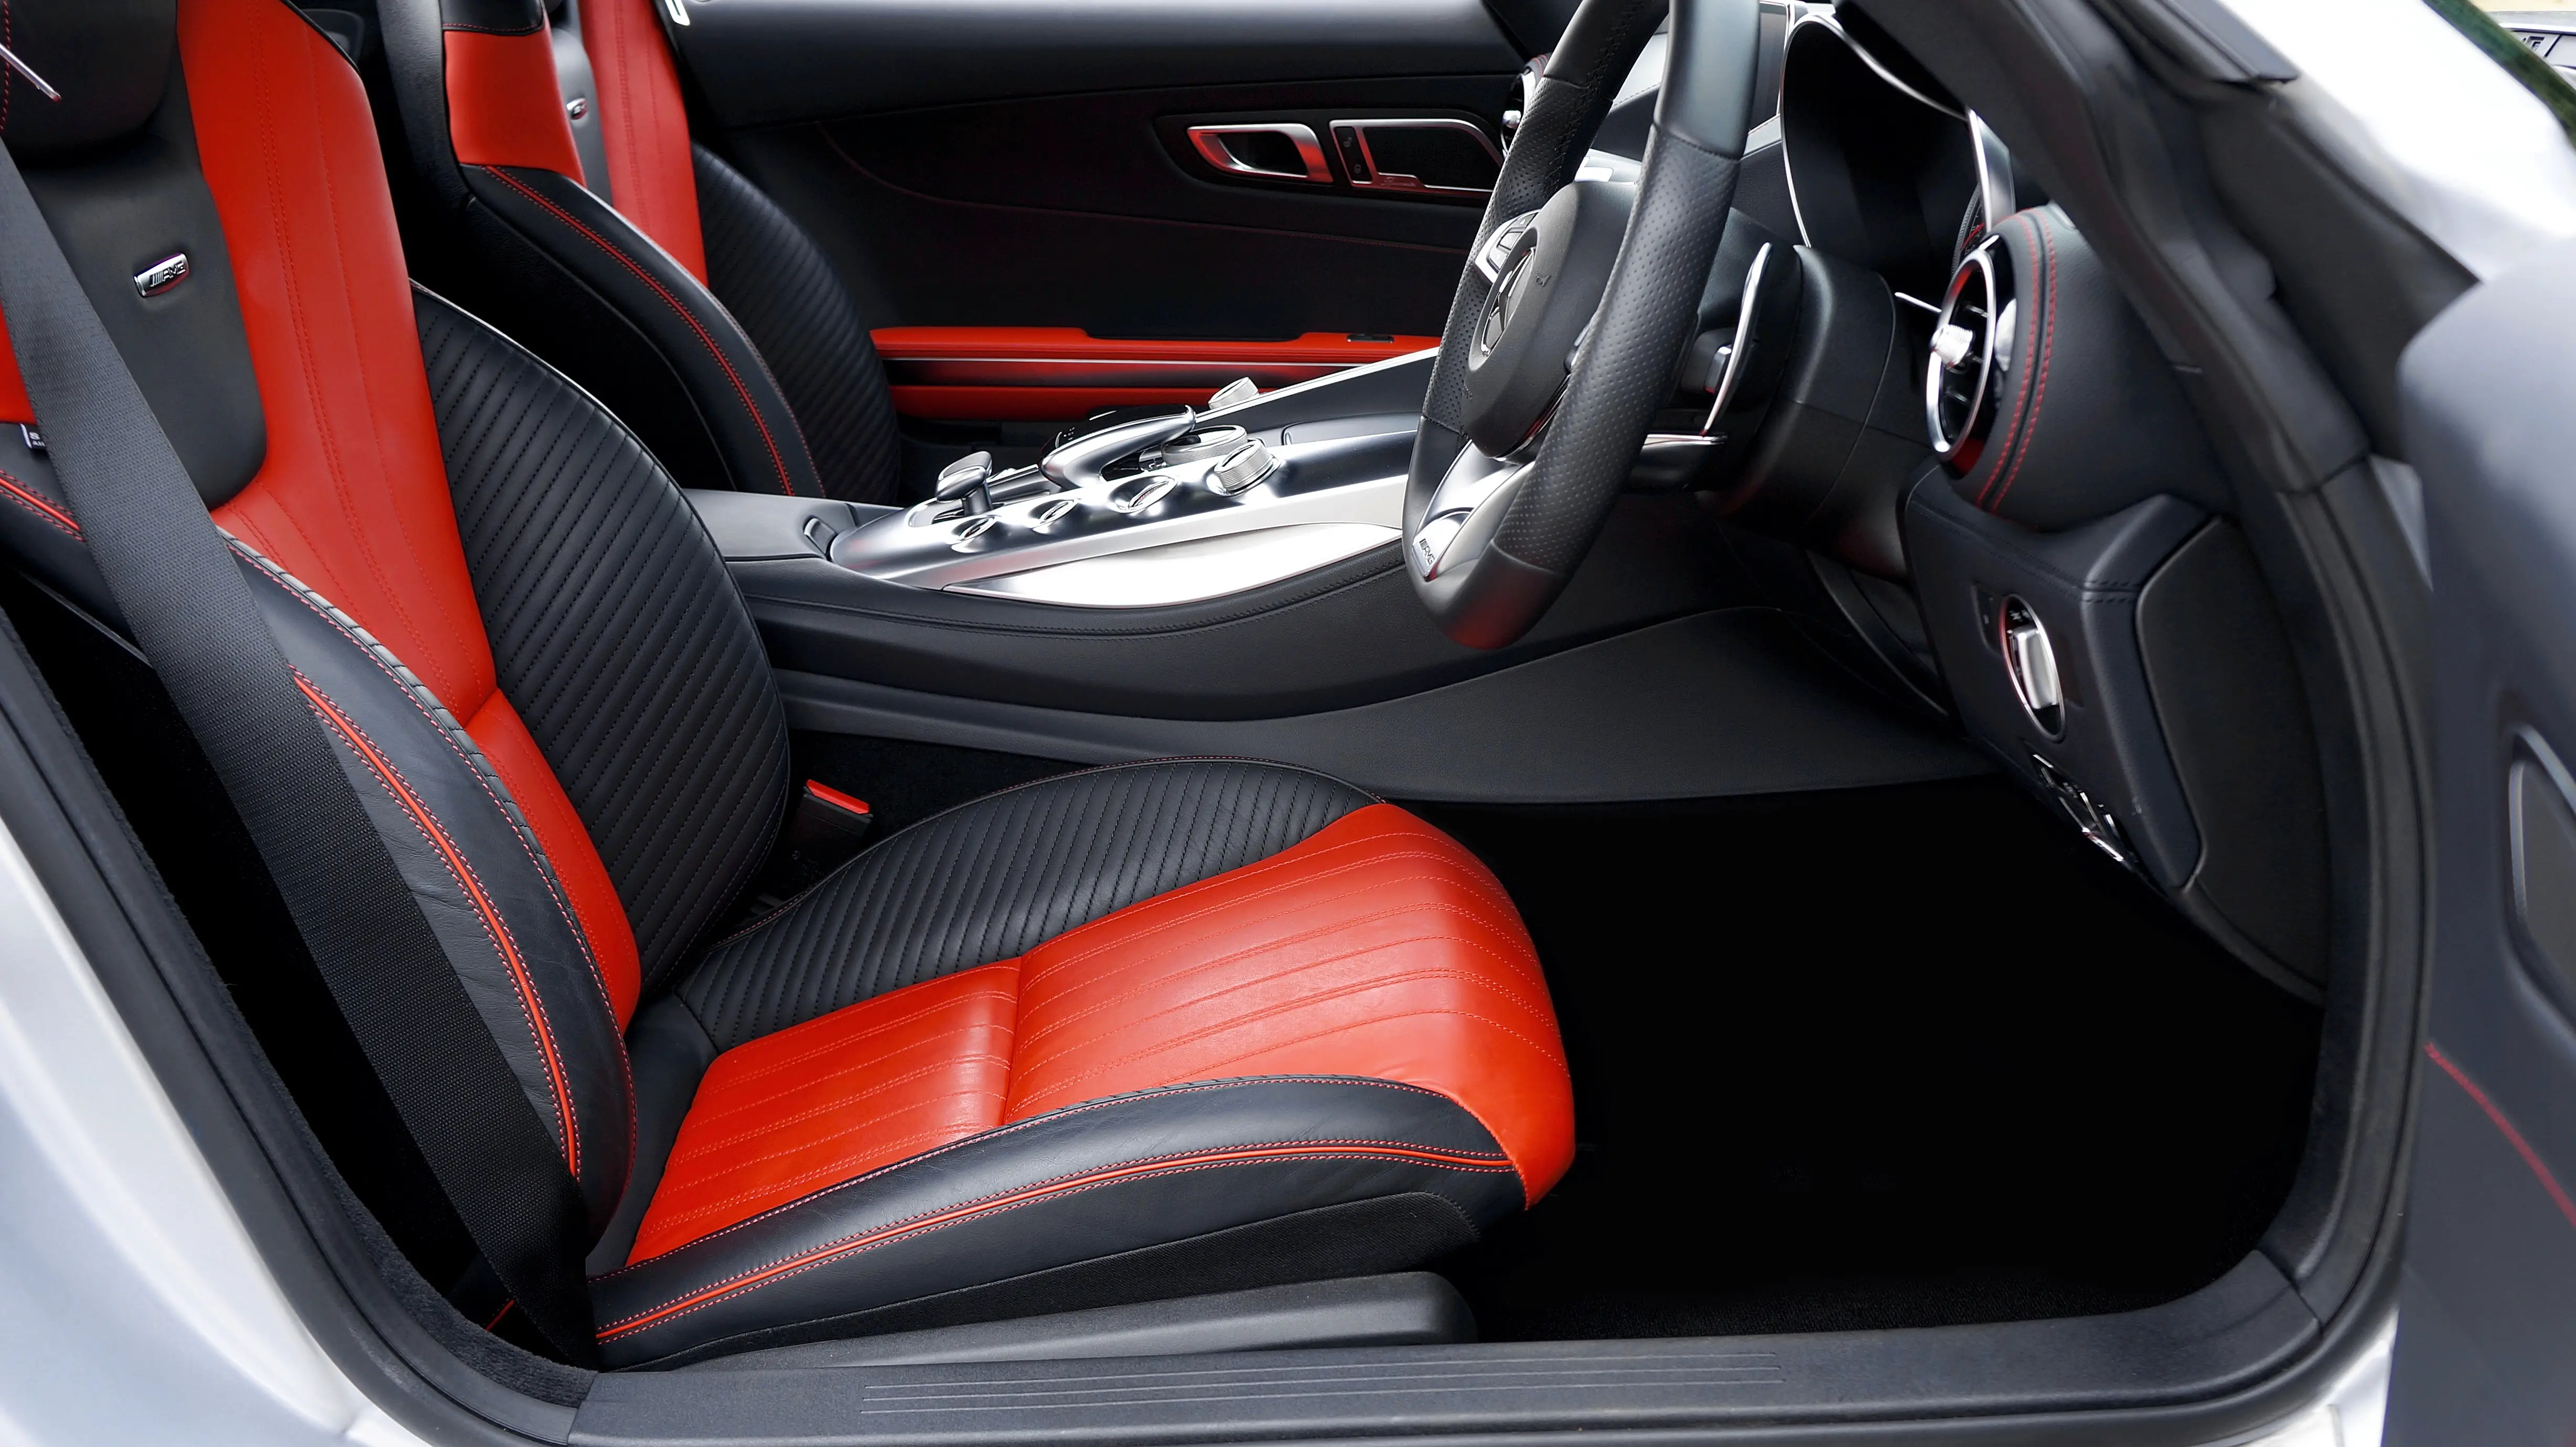 An in-depth review of the best leather seat covers